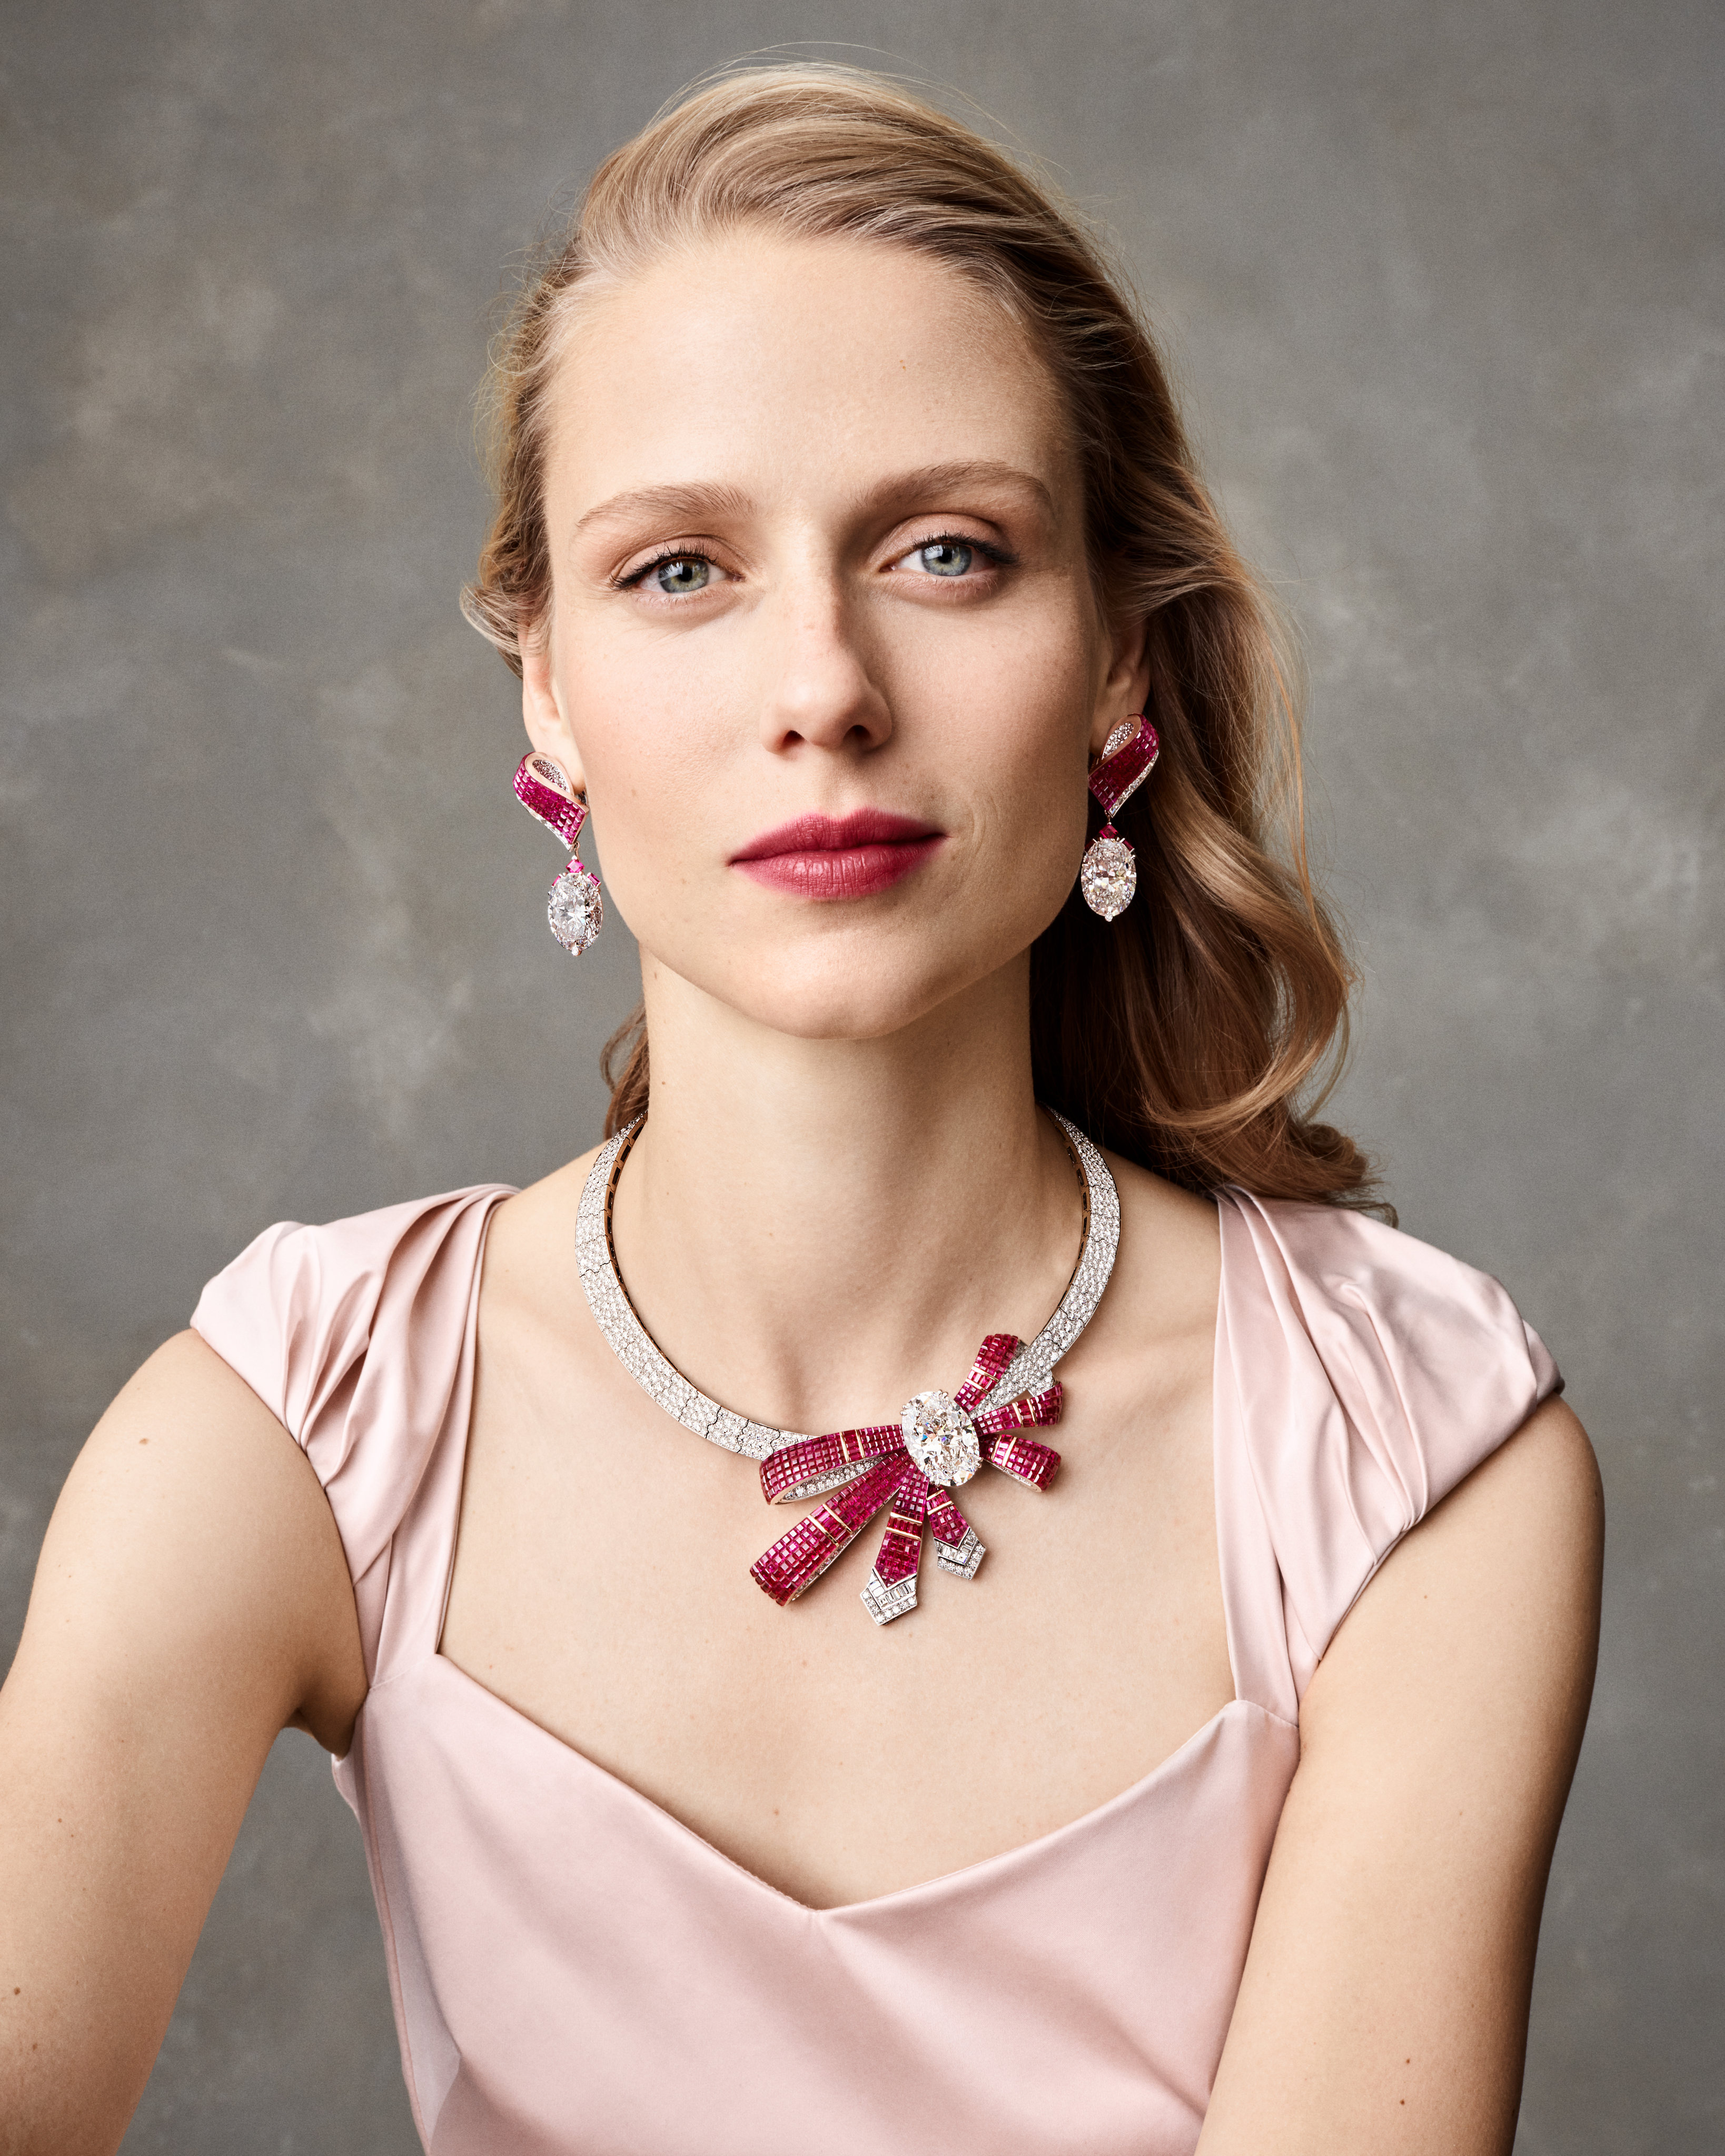 Houses like Van Cleef & Arpels are featuring couture in their new high jewellery collections. Photo: Van Cleef & Arpels